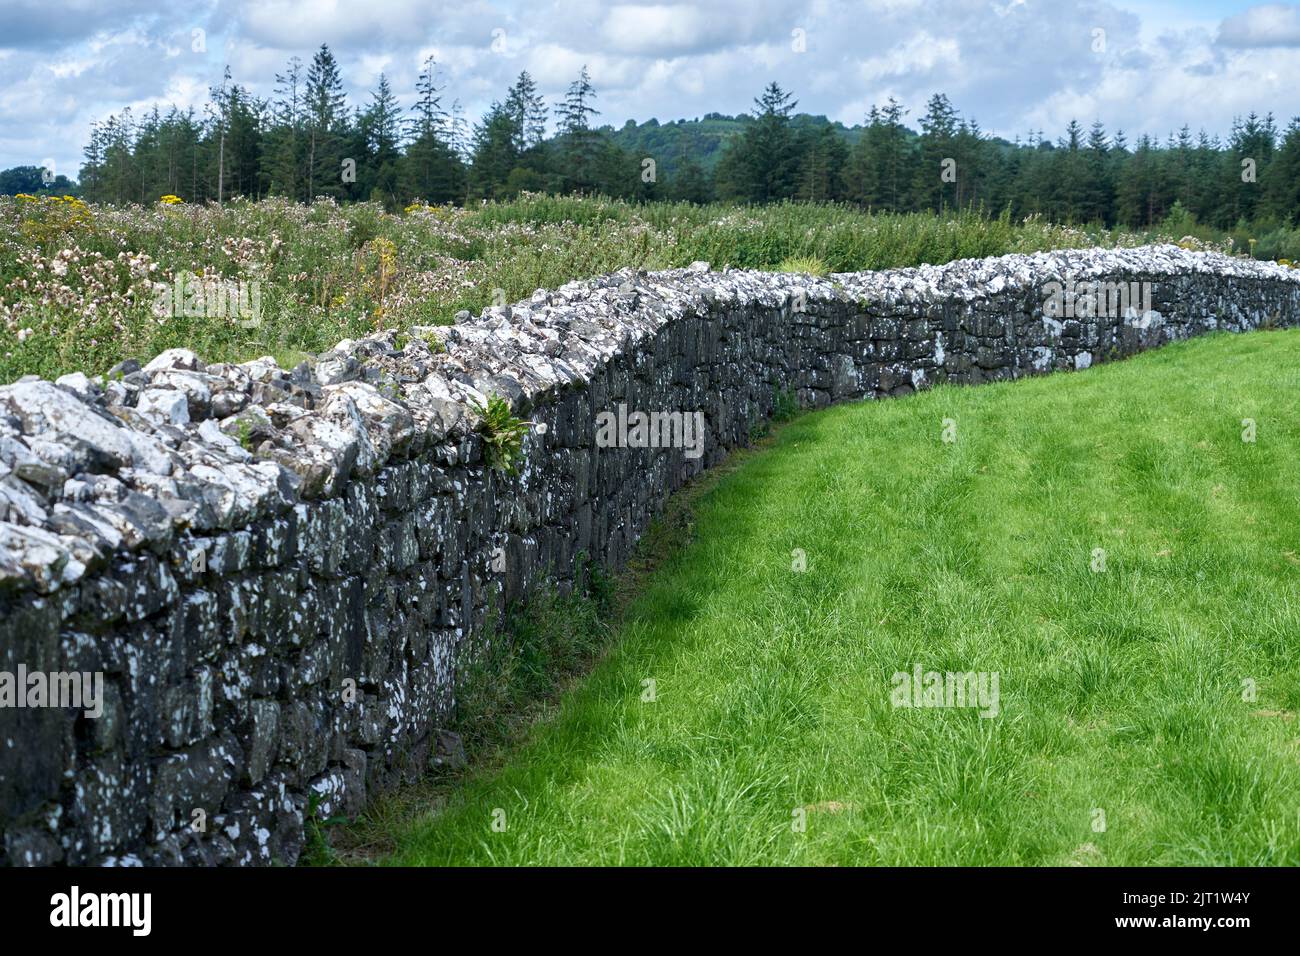 A long stone wall dividing overgrown grass from a manicured green lawn. Stock Photo